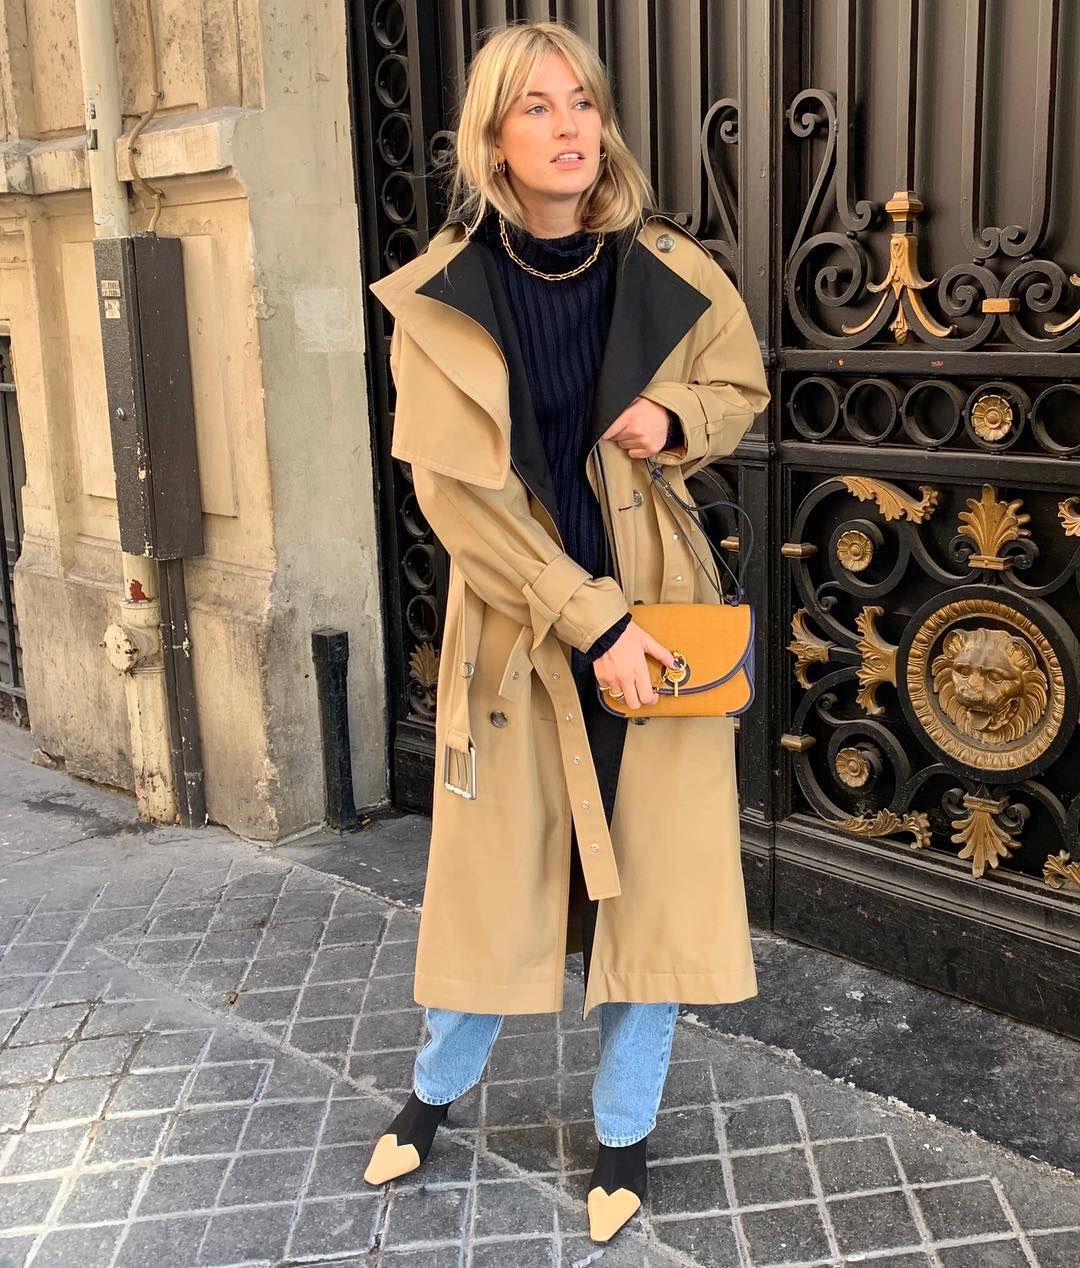 French Style Influencers - Camille Charriere